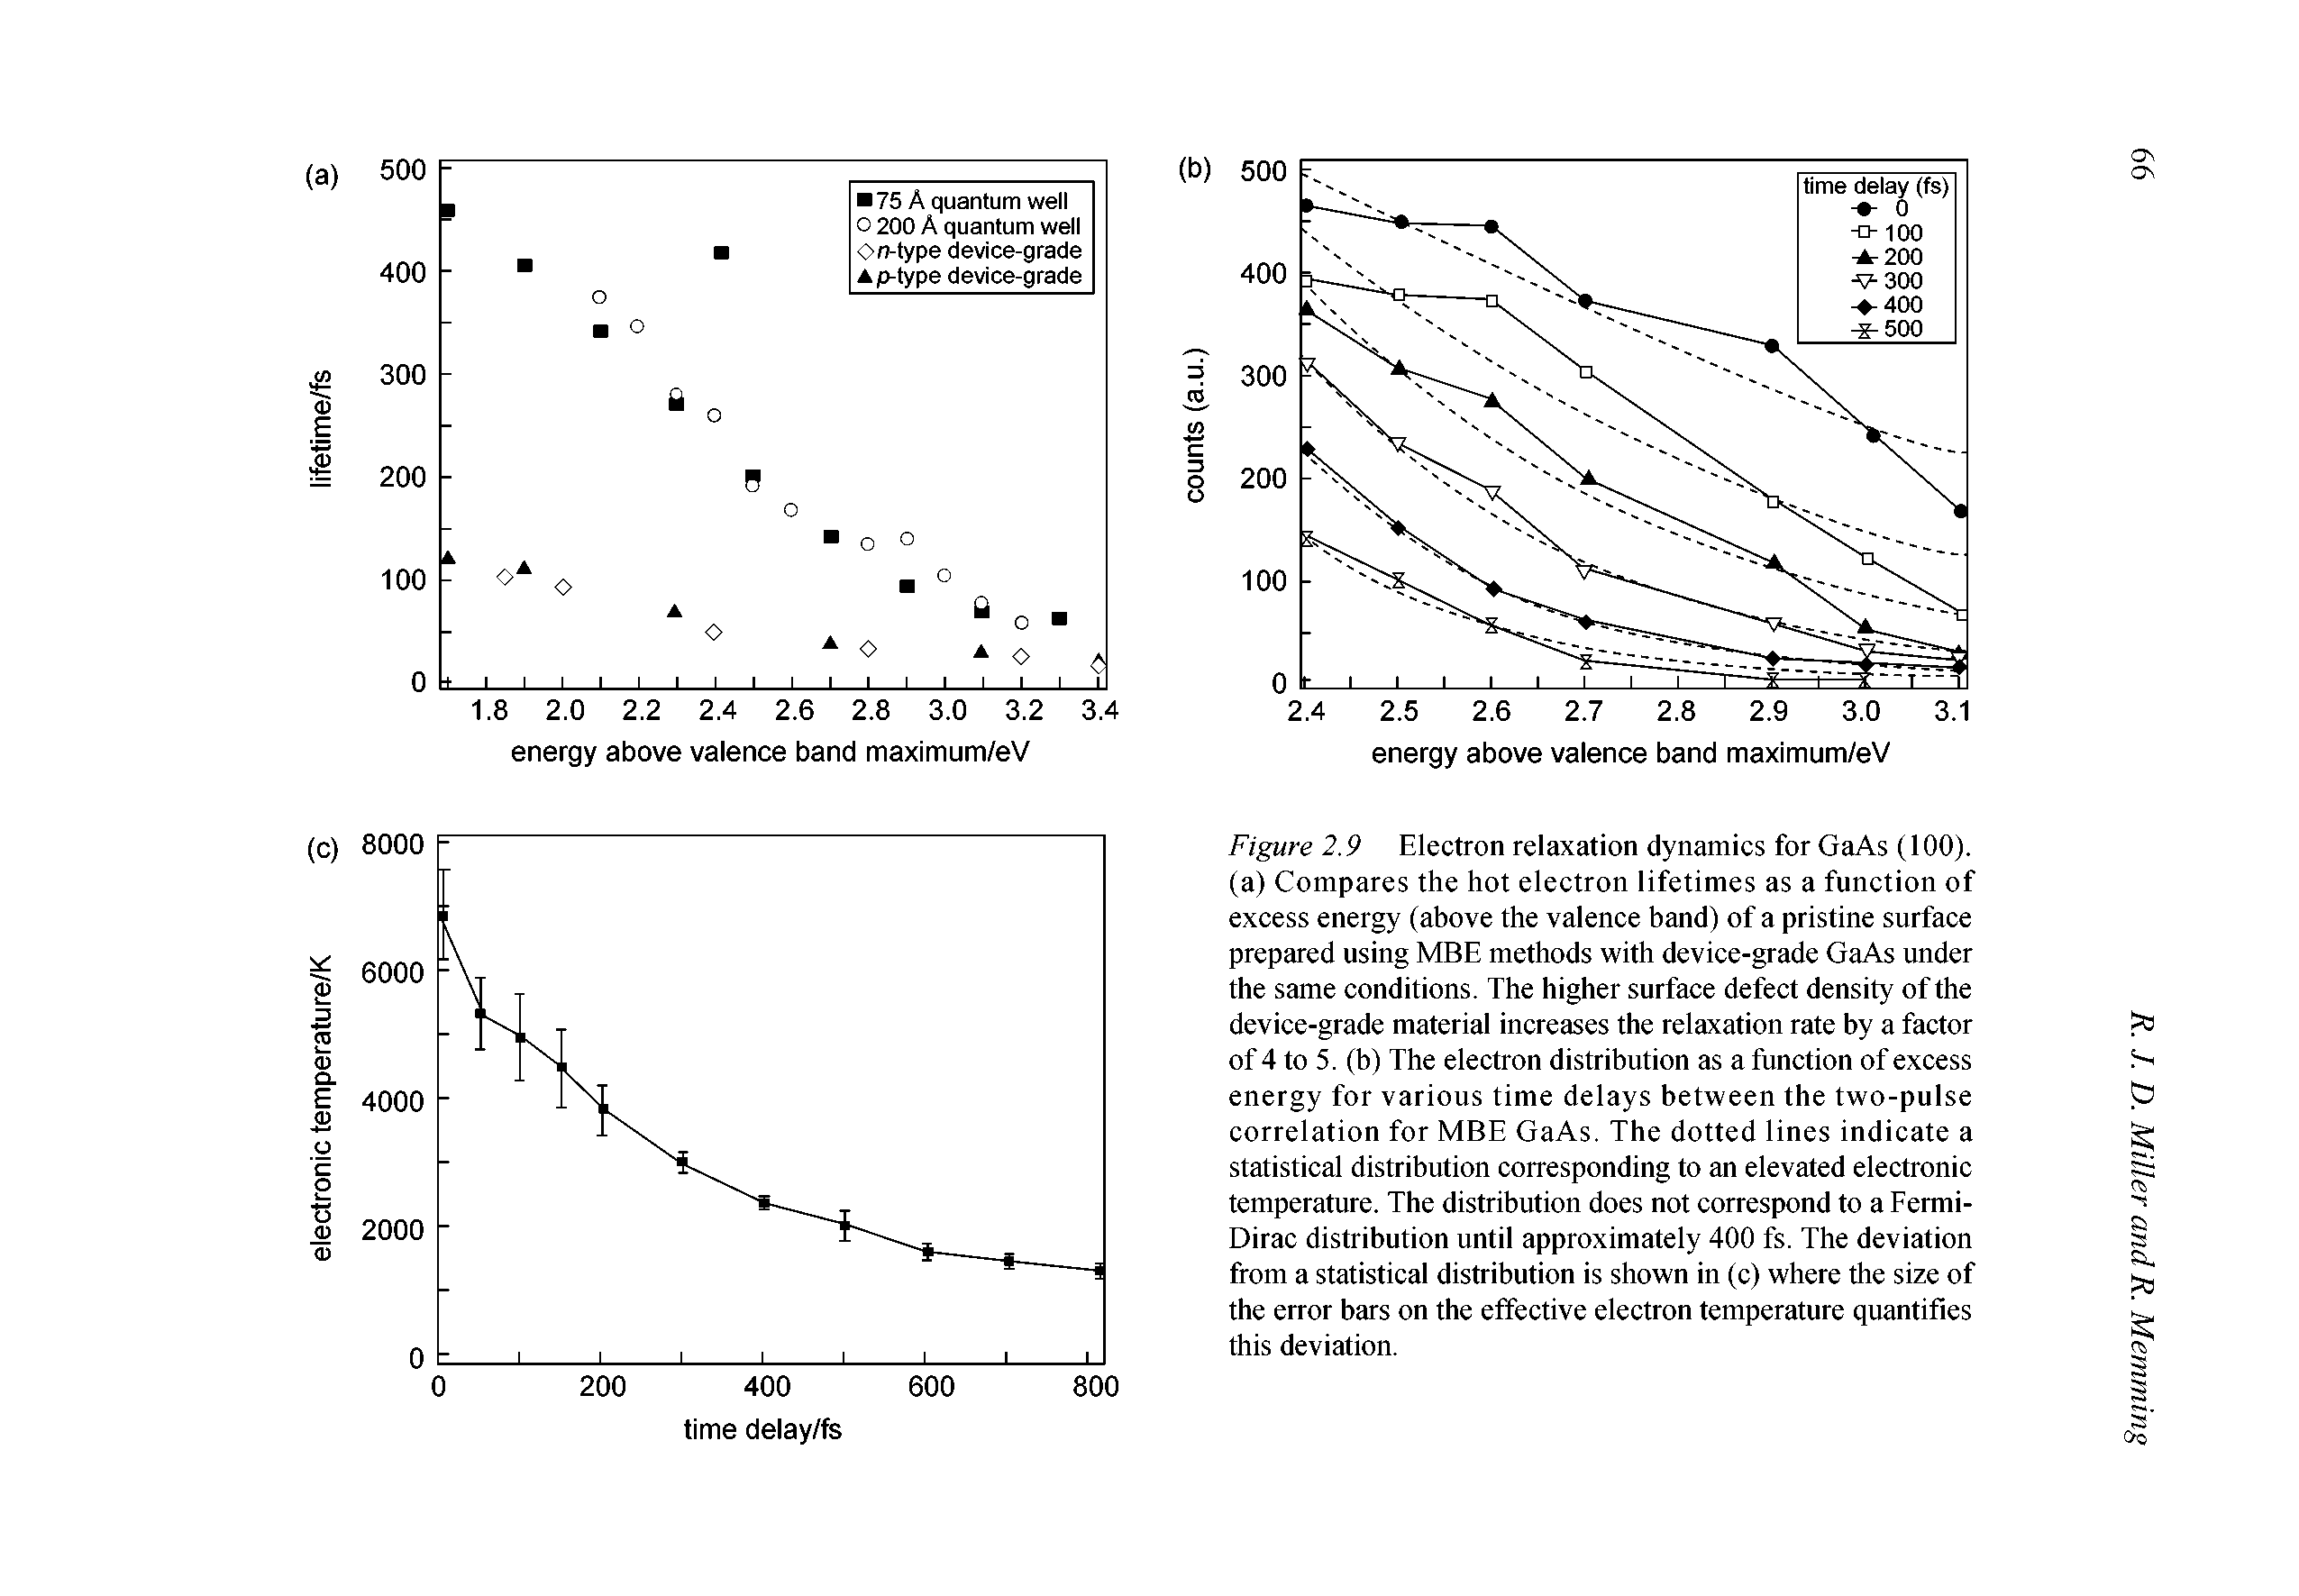 Figure 2.9 Electron relaxation dynamics for GaAs (100). (a) Compares the hot electron lifetimes as a function of excess energy (above the valence band) of a pristine surface prepared using MBE methods with device-grade GaAs under the same conditions. The higher surface defect density of the device-grade material increases the relaxation rate by a factor of 4 to 5. (b) The electron distribution as a function of excess energy for various time delays between the two-pulse correlation for MBE GaAs. The dotted lines indicate a statistical distribution corresponding to an elevated electronic temperature. The distribution does not correspond to a Fermi-Dirac distribution until approximately 400 fs. The deviation from a statistical distribution is shown in (c) where the size of the error bars on the effective electron temperature quantifies this deviation.